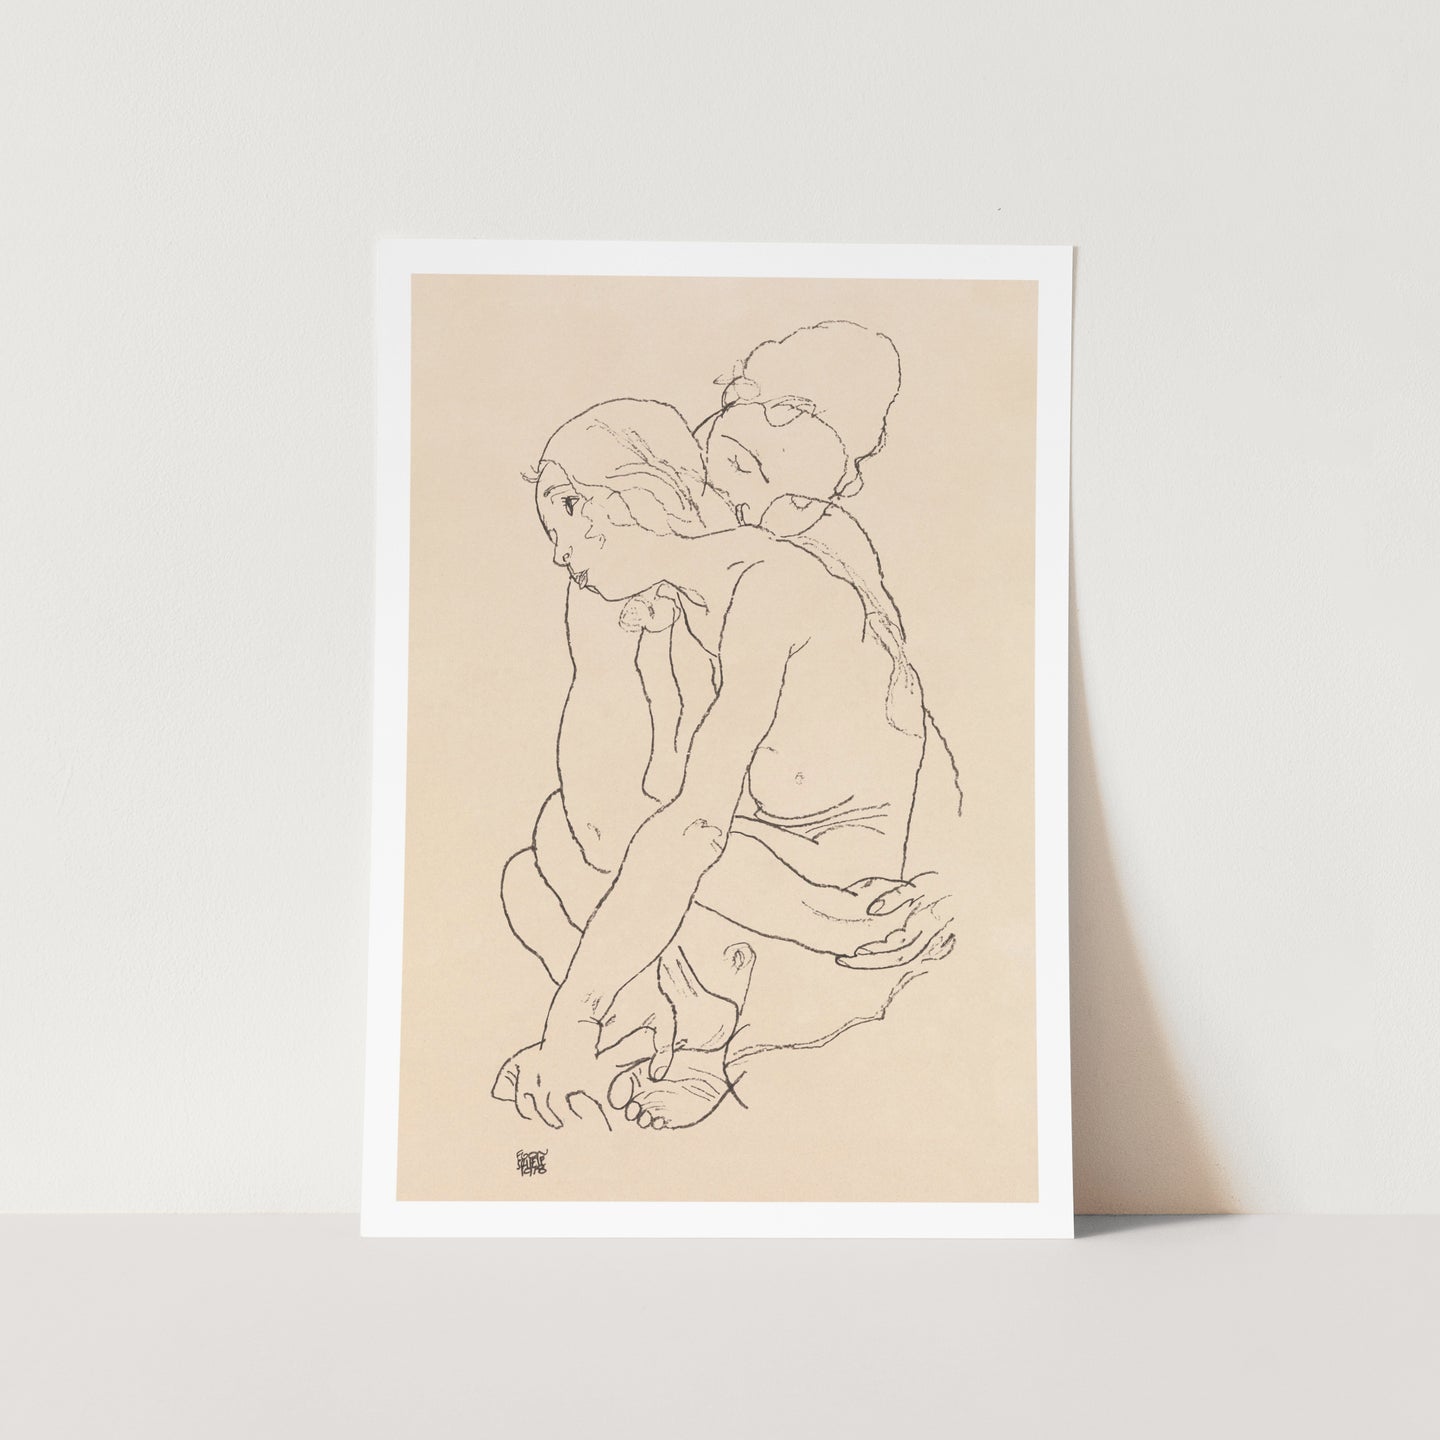 Woman and Girl Embracing by Egon Schiele PFY Art Print